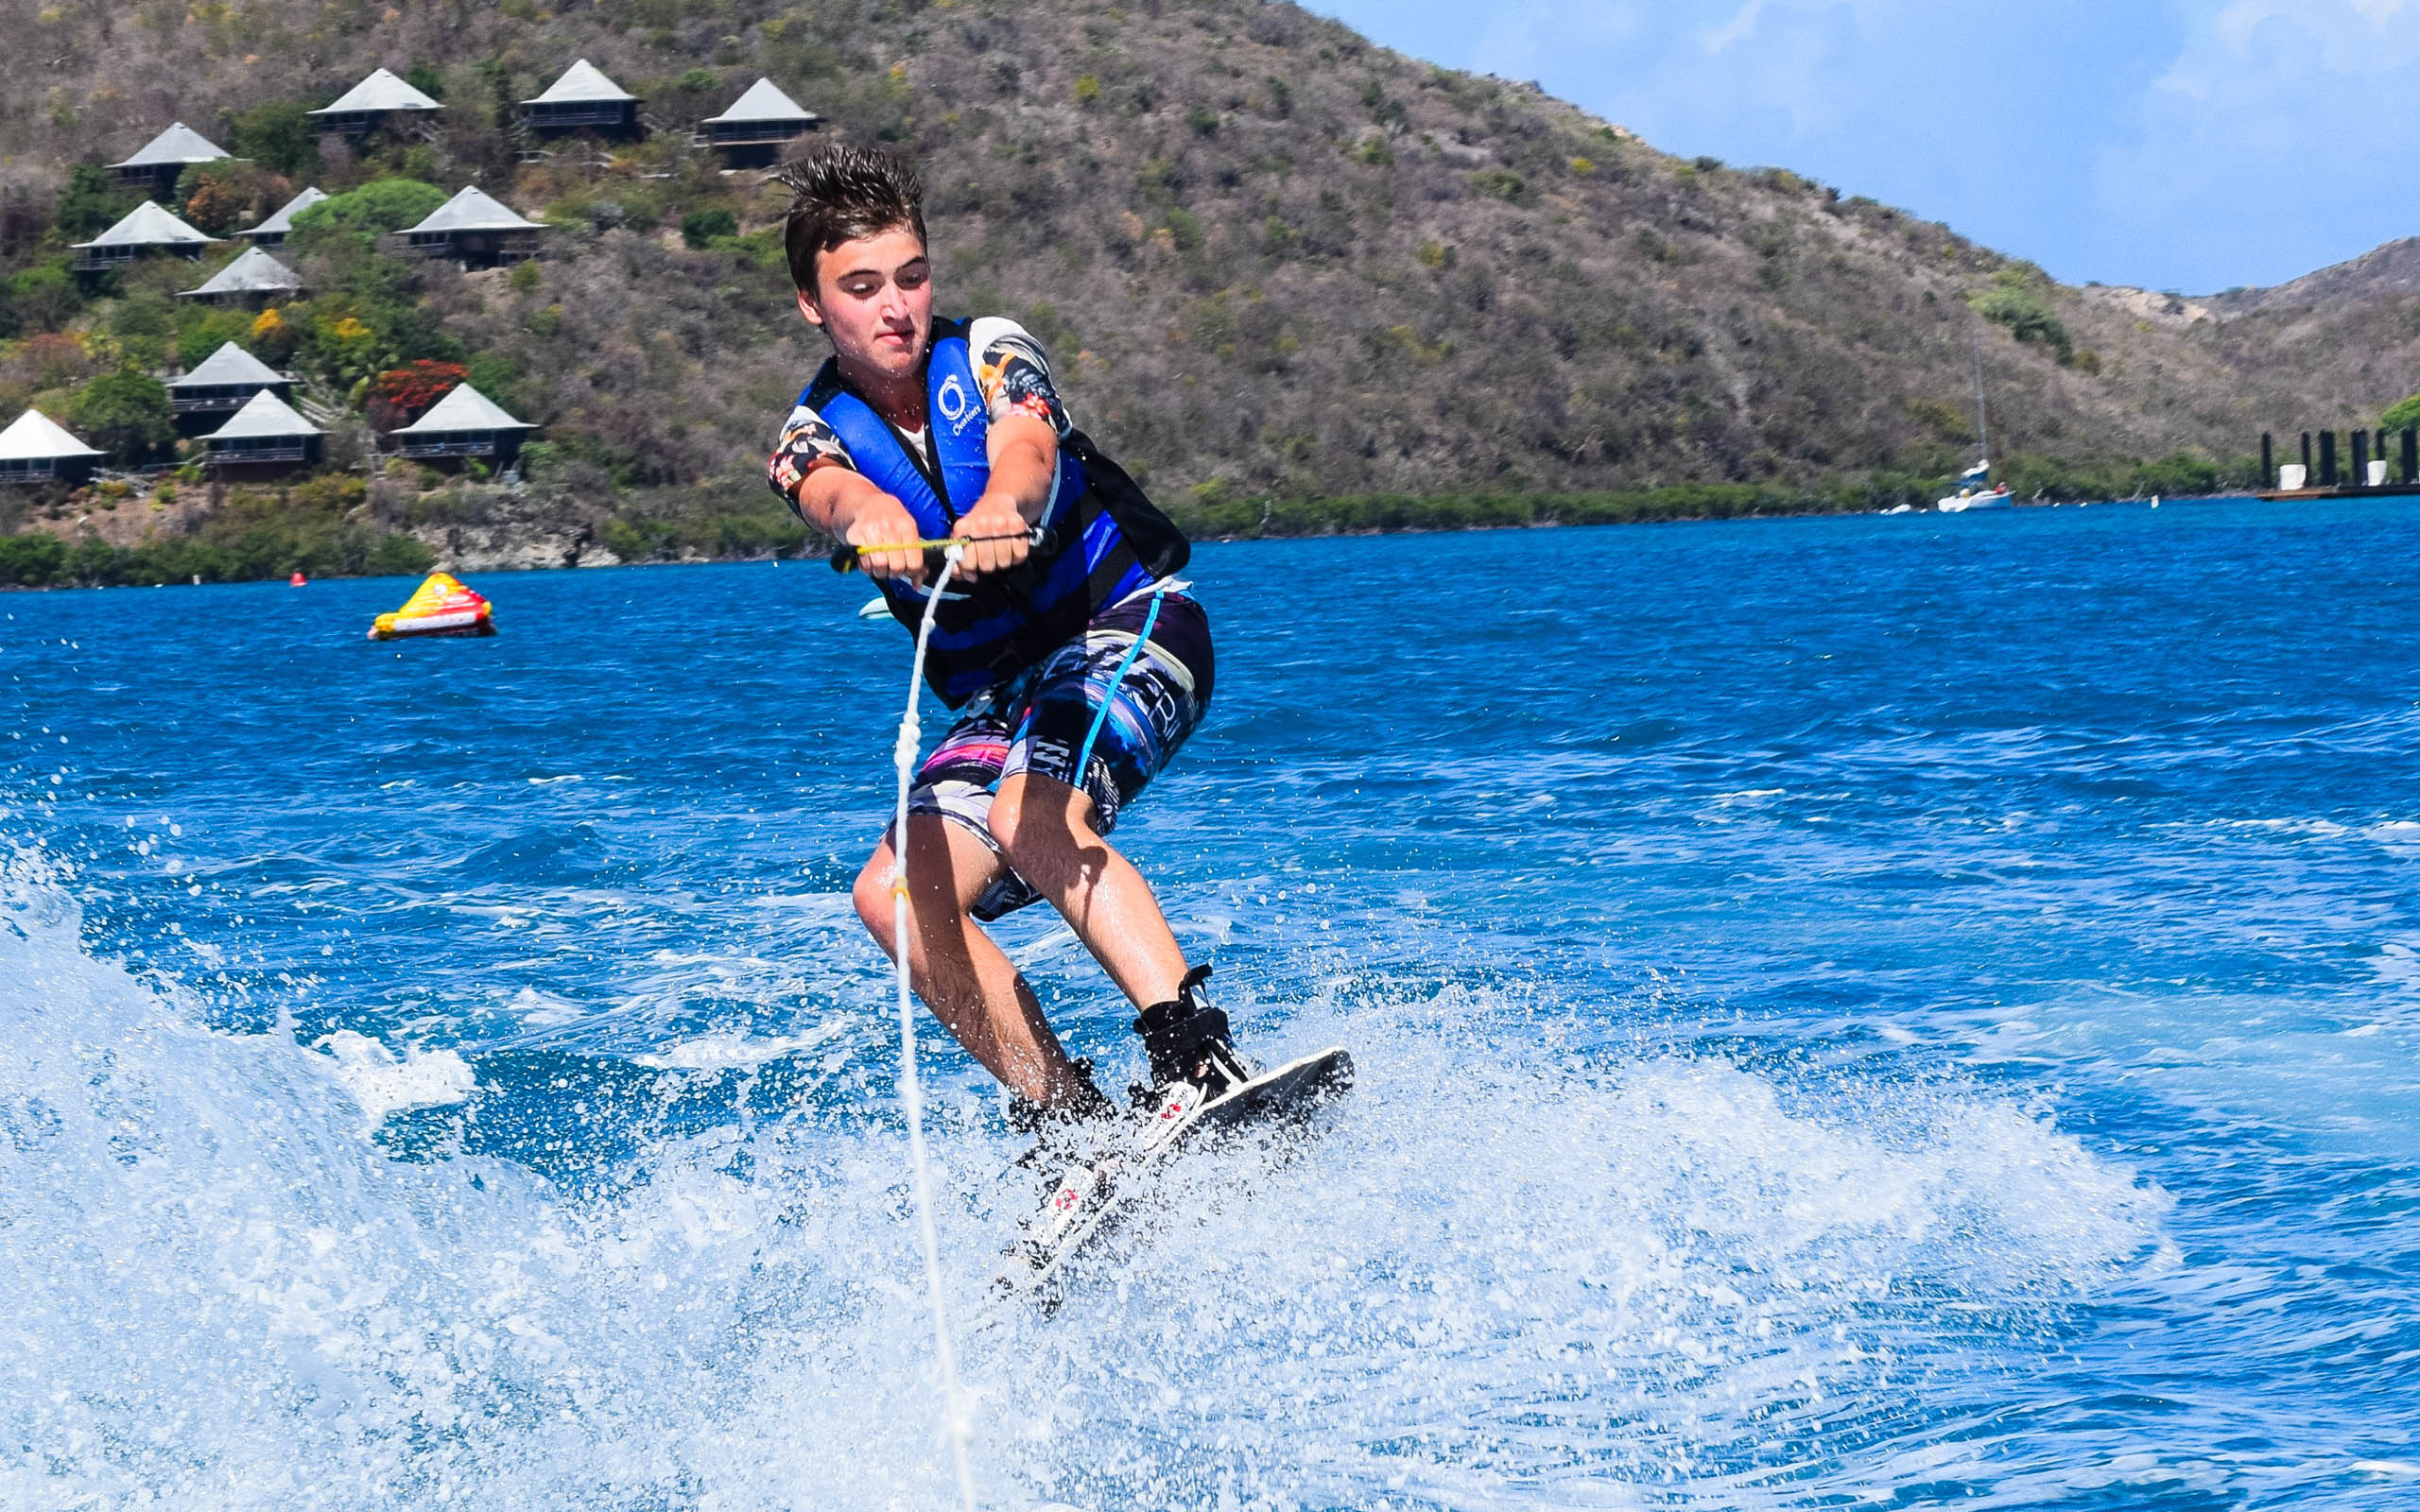 A boy wakeboarding in the water.